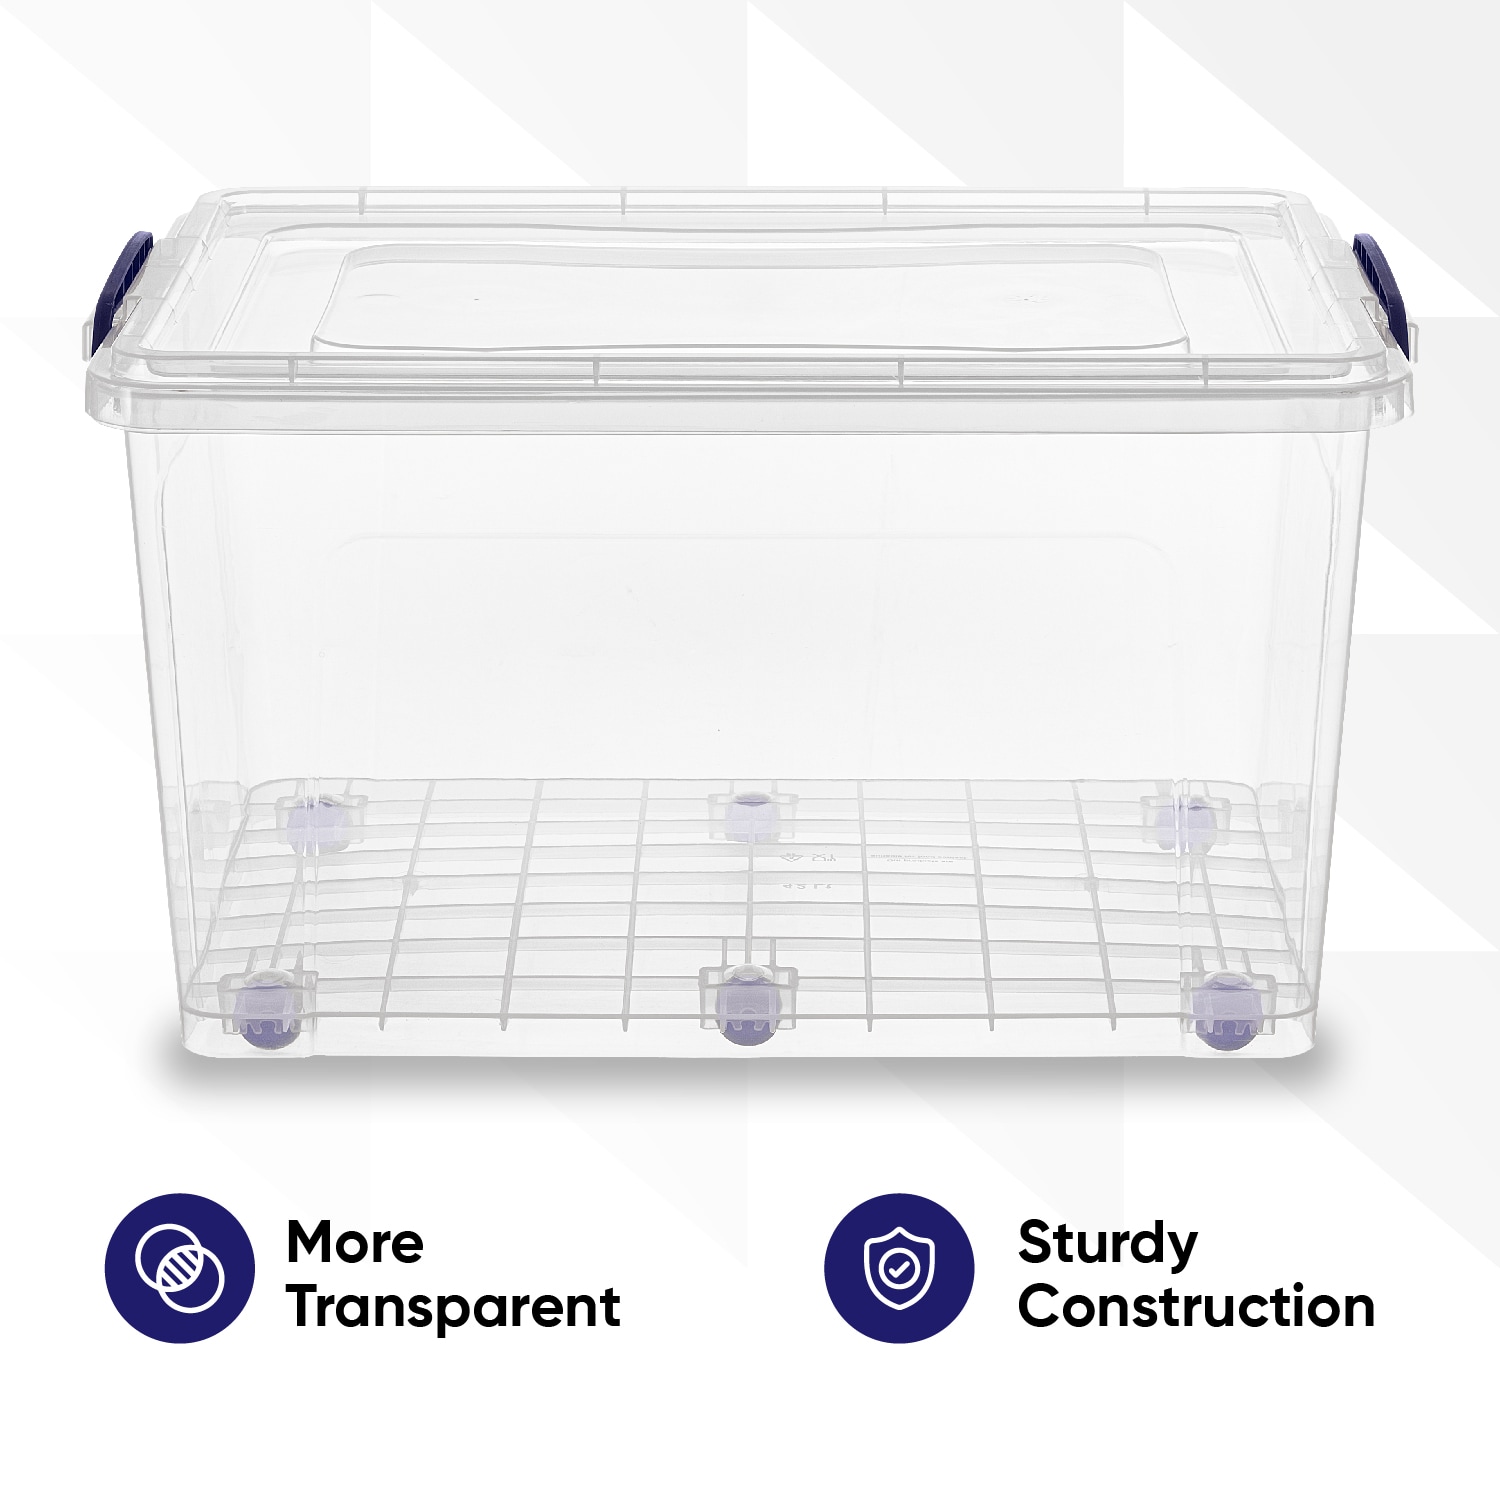 Superio Storage Container, 22 qt, Clear